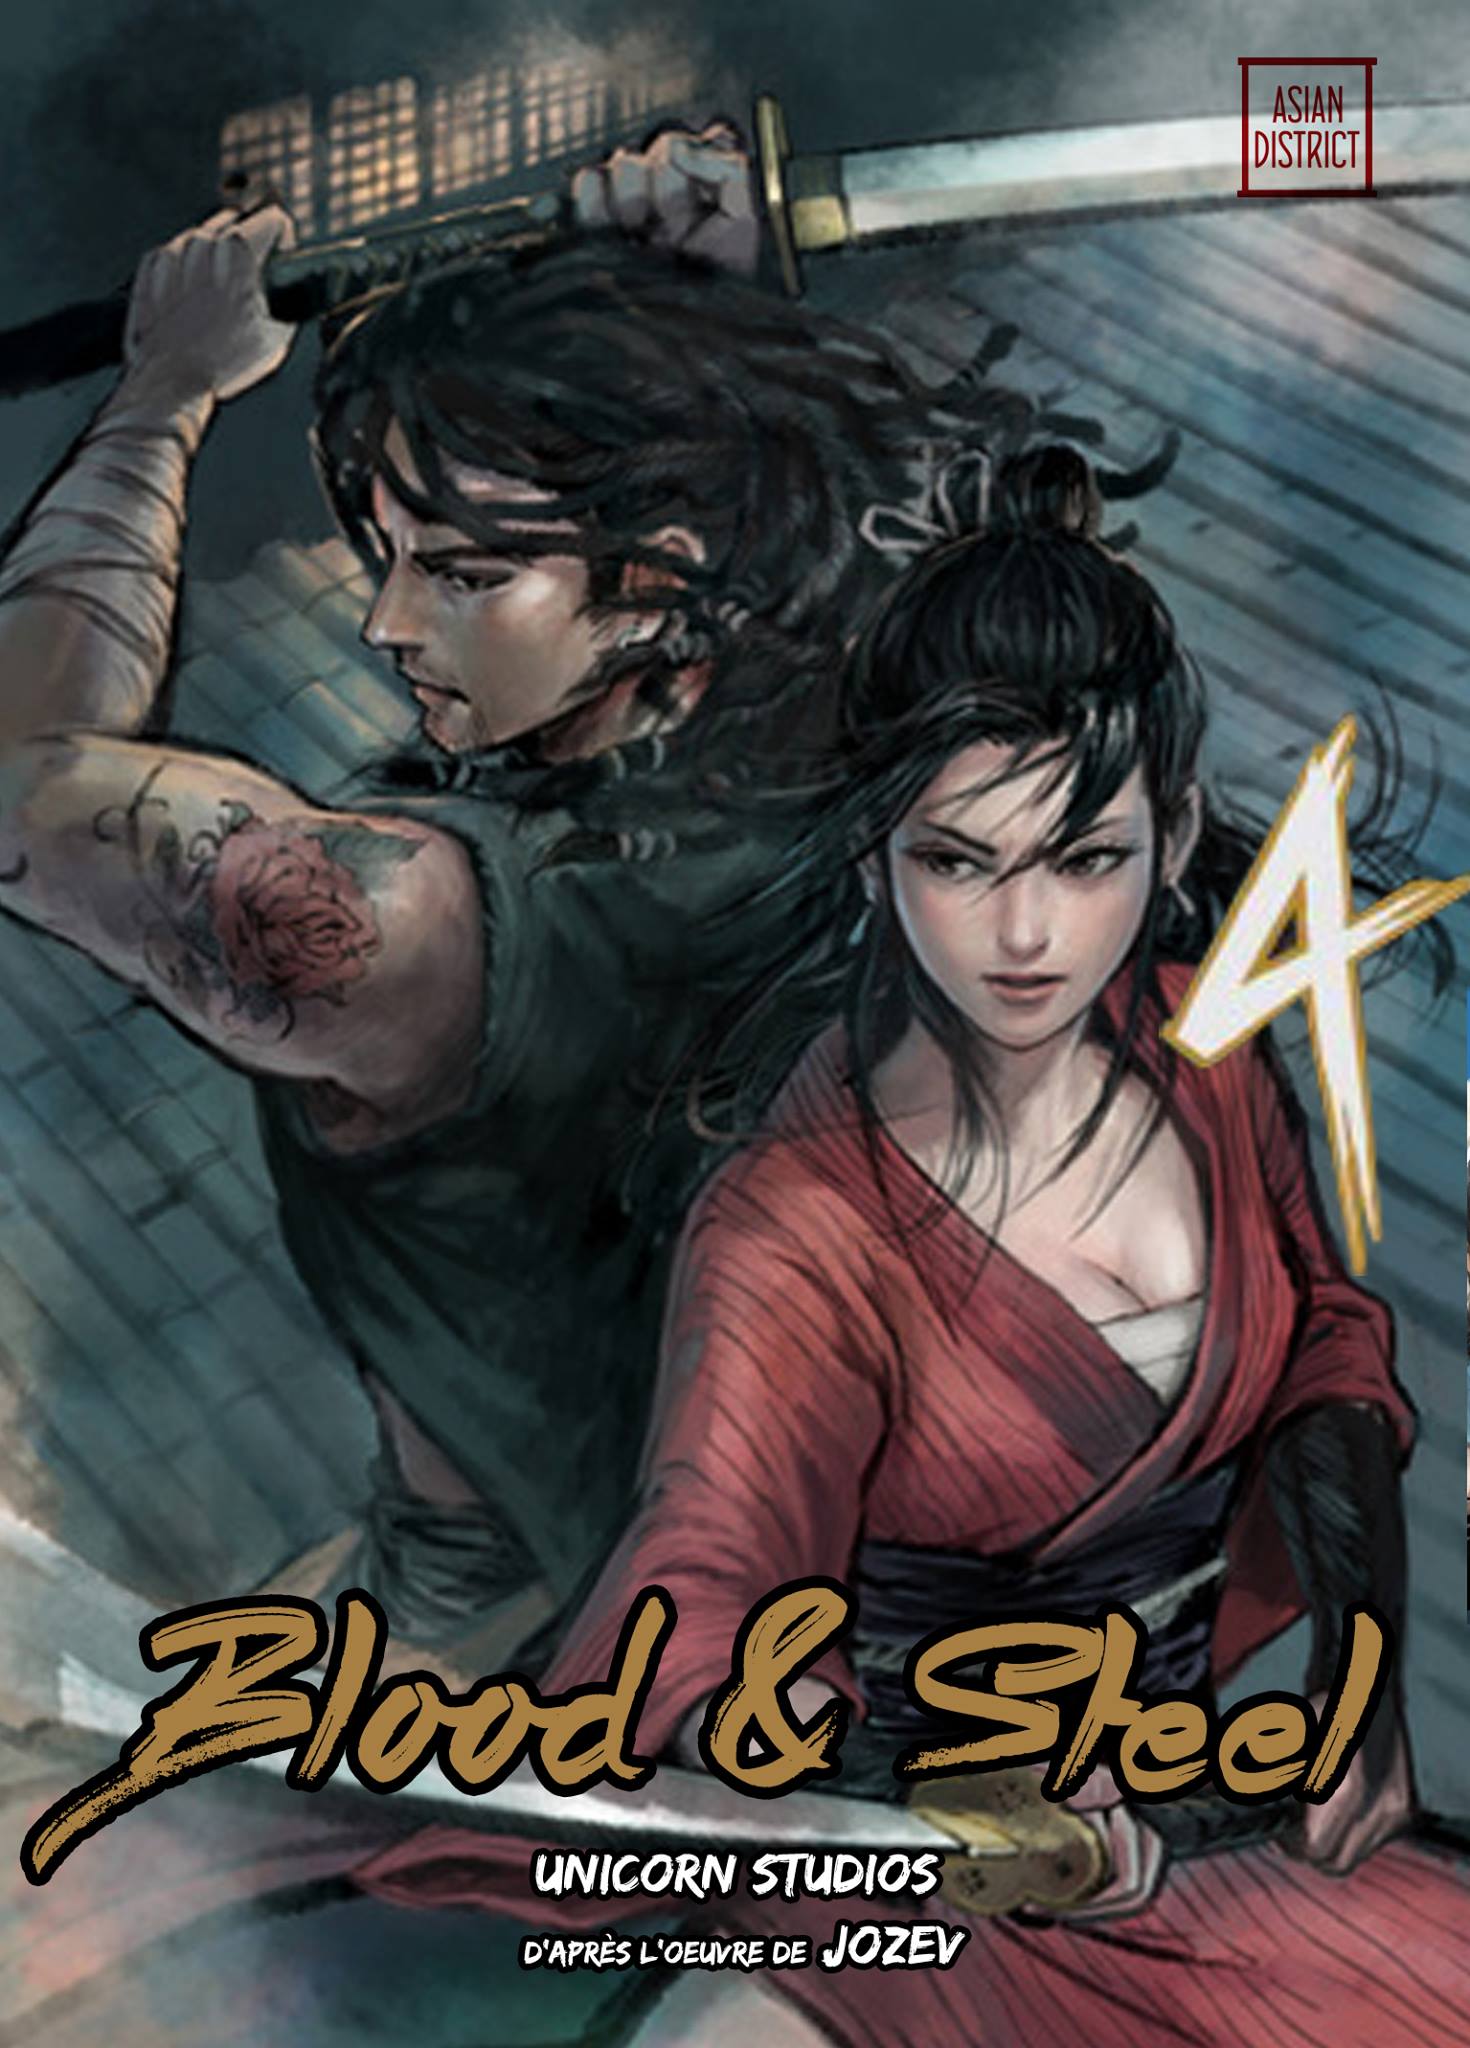 Blood and steel Vol.4